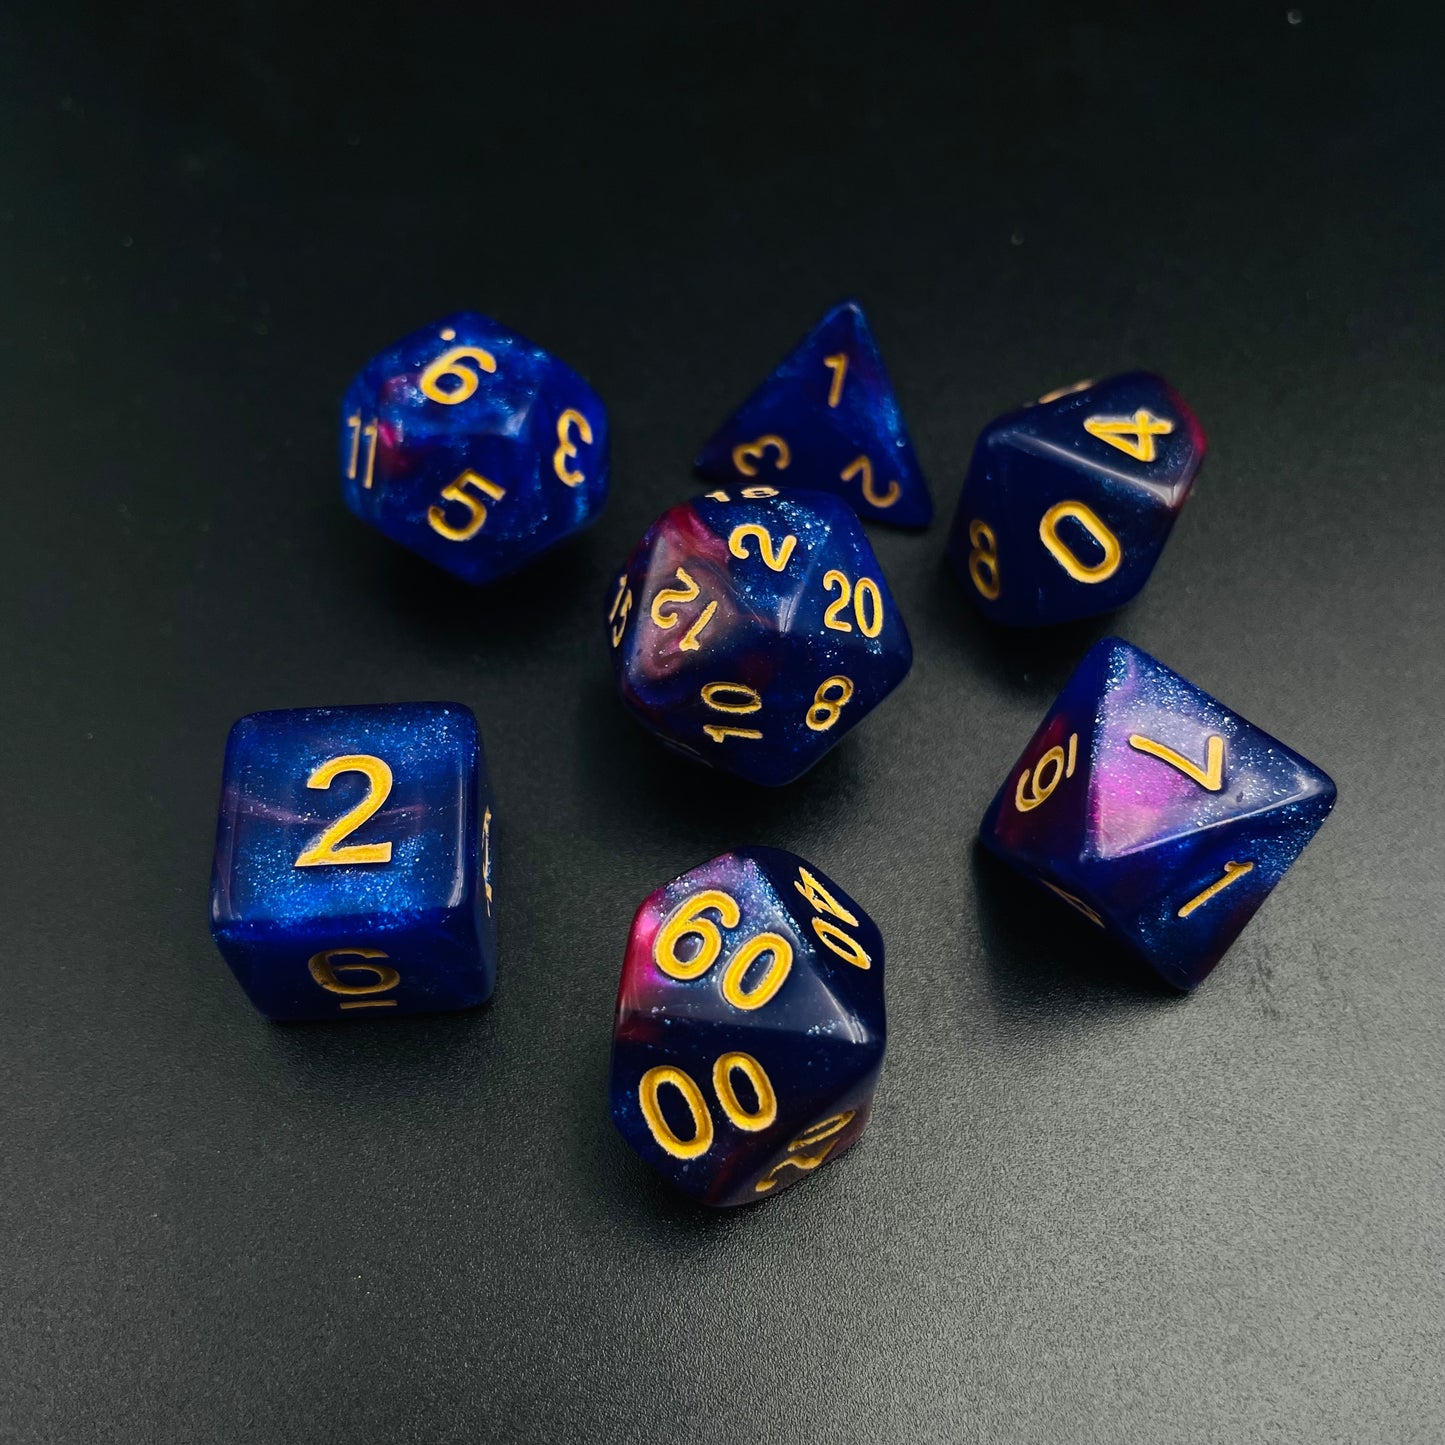 FREE Today: Astral Plane DnD Dice Set | Red Blue Swirling Galaxy